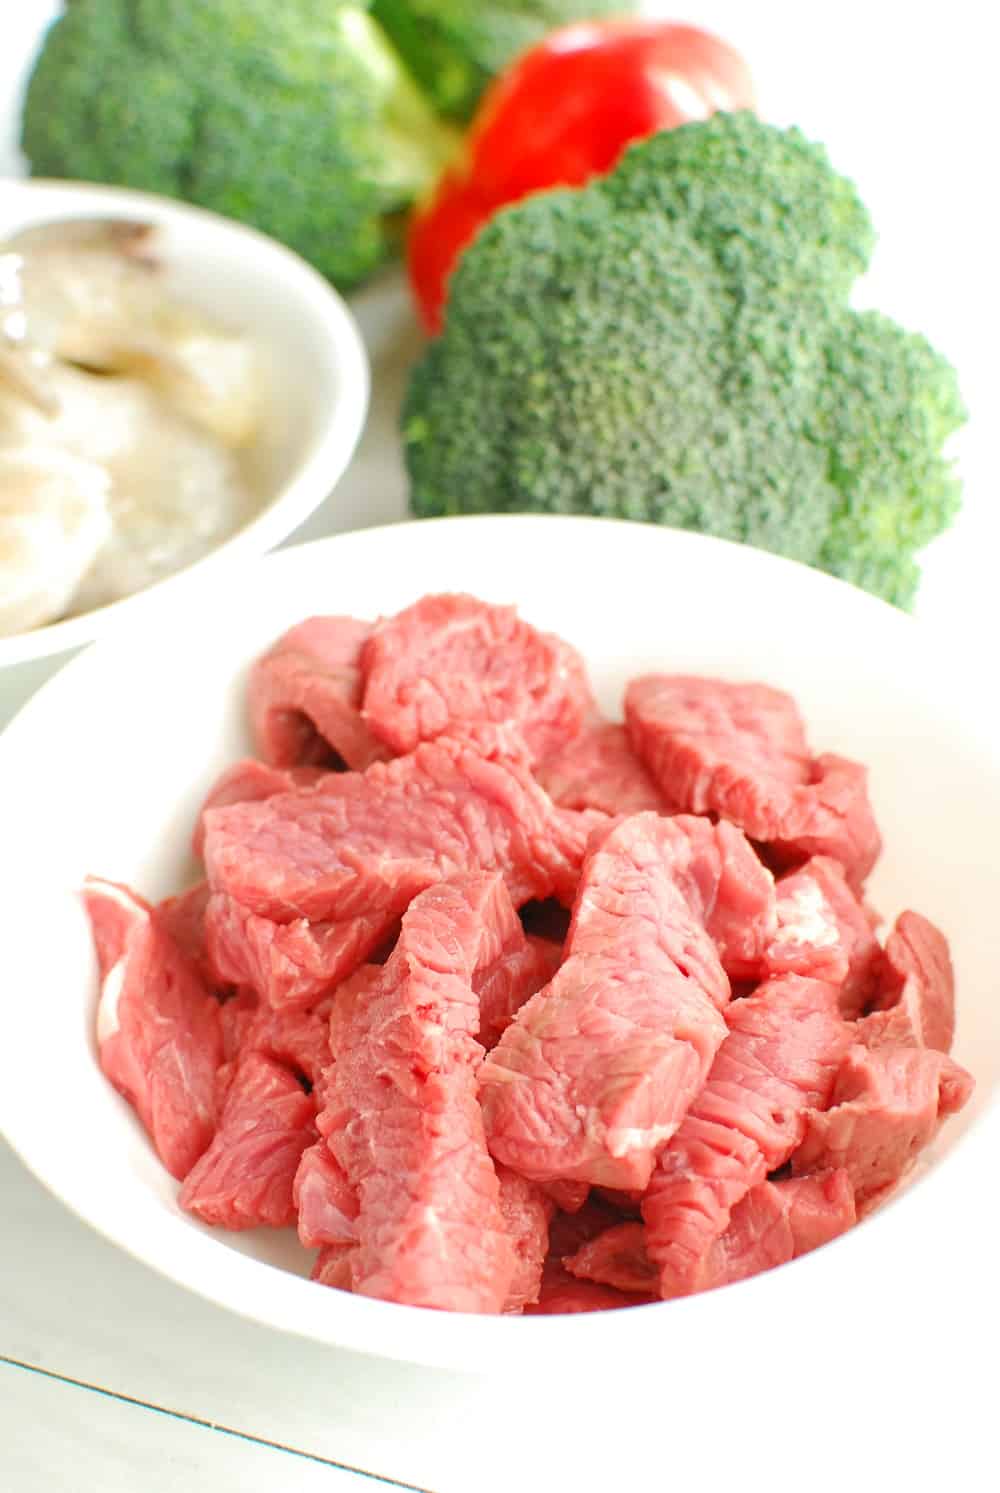 Steak in a bowl next to broccoli and shrimp.